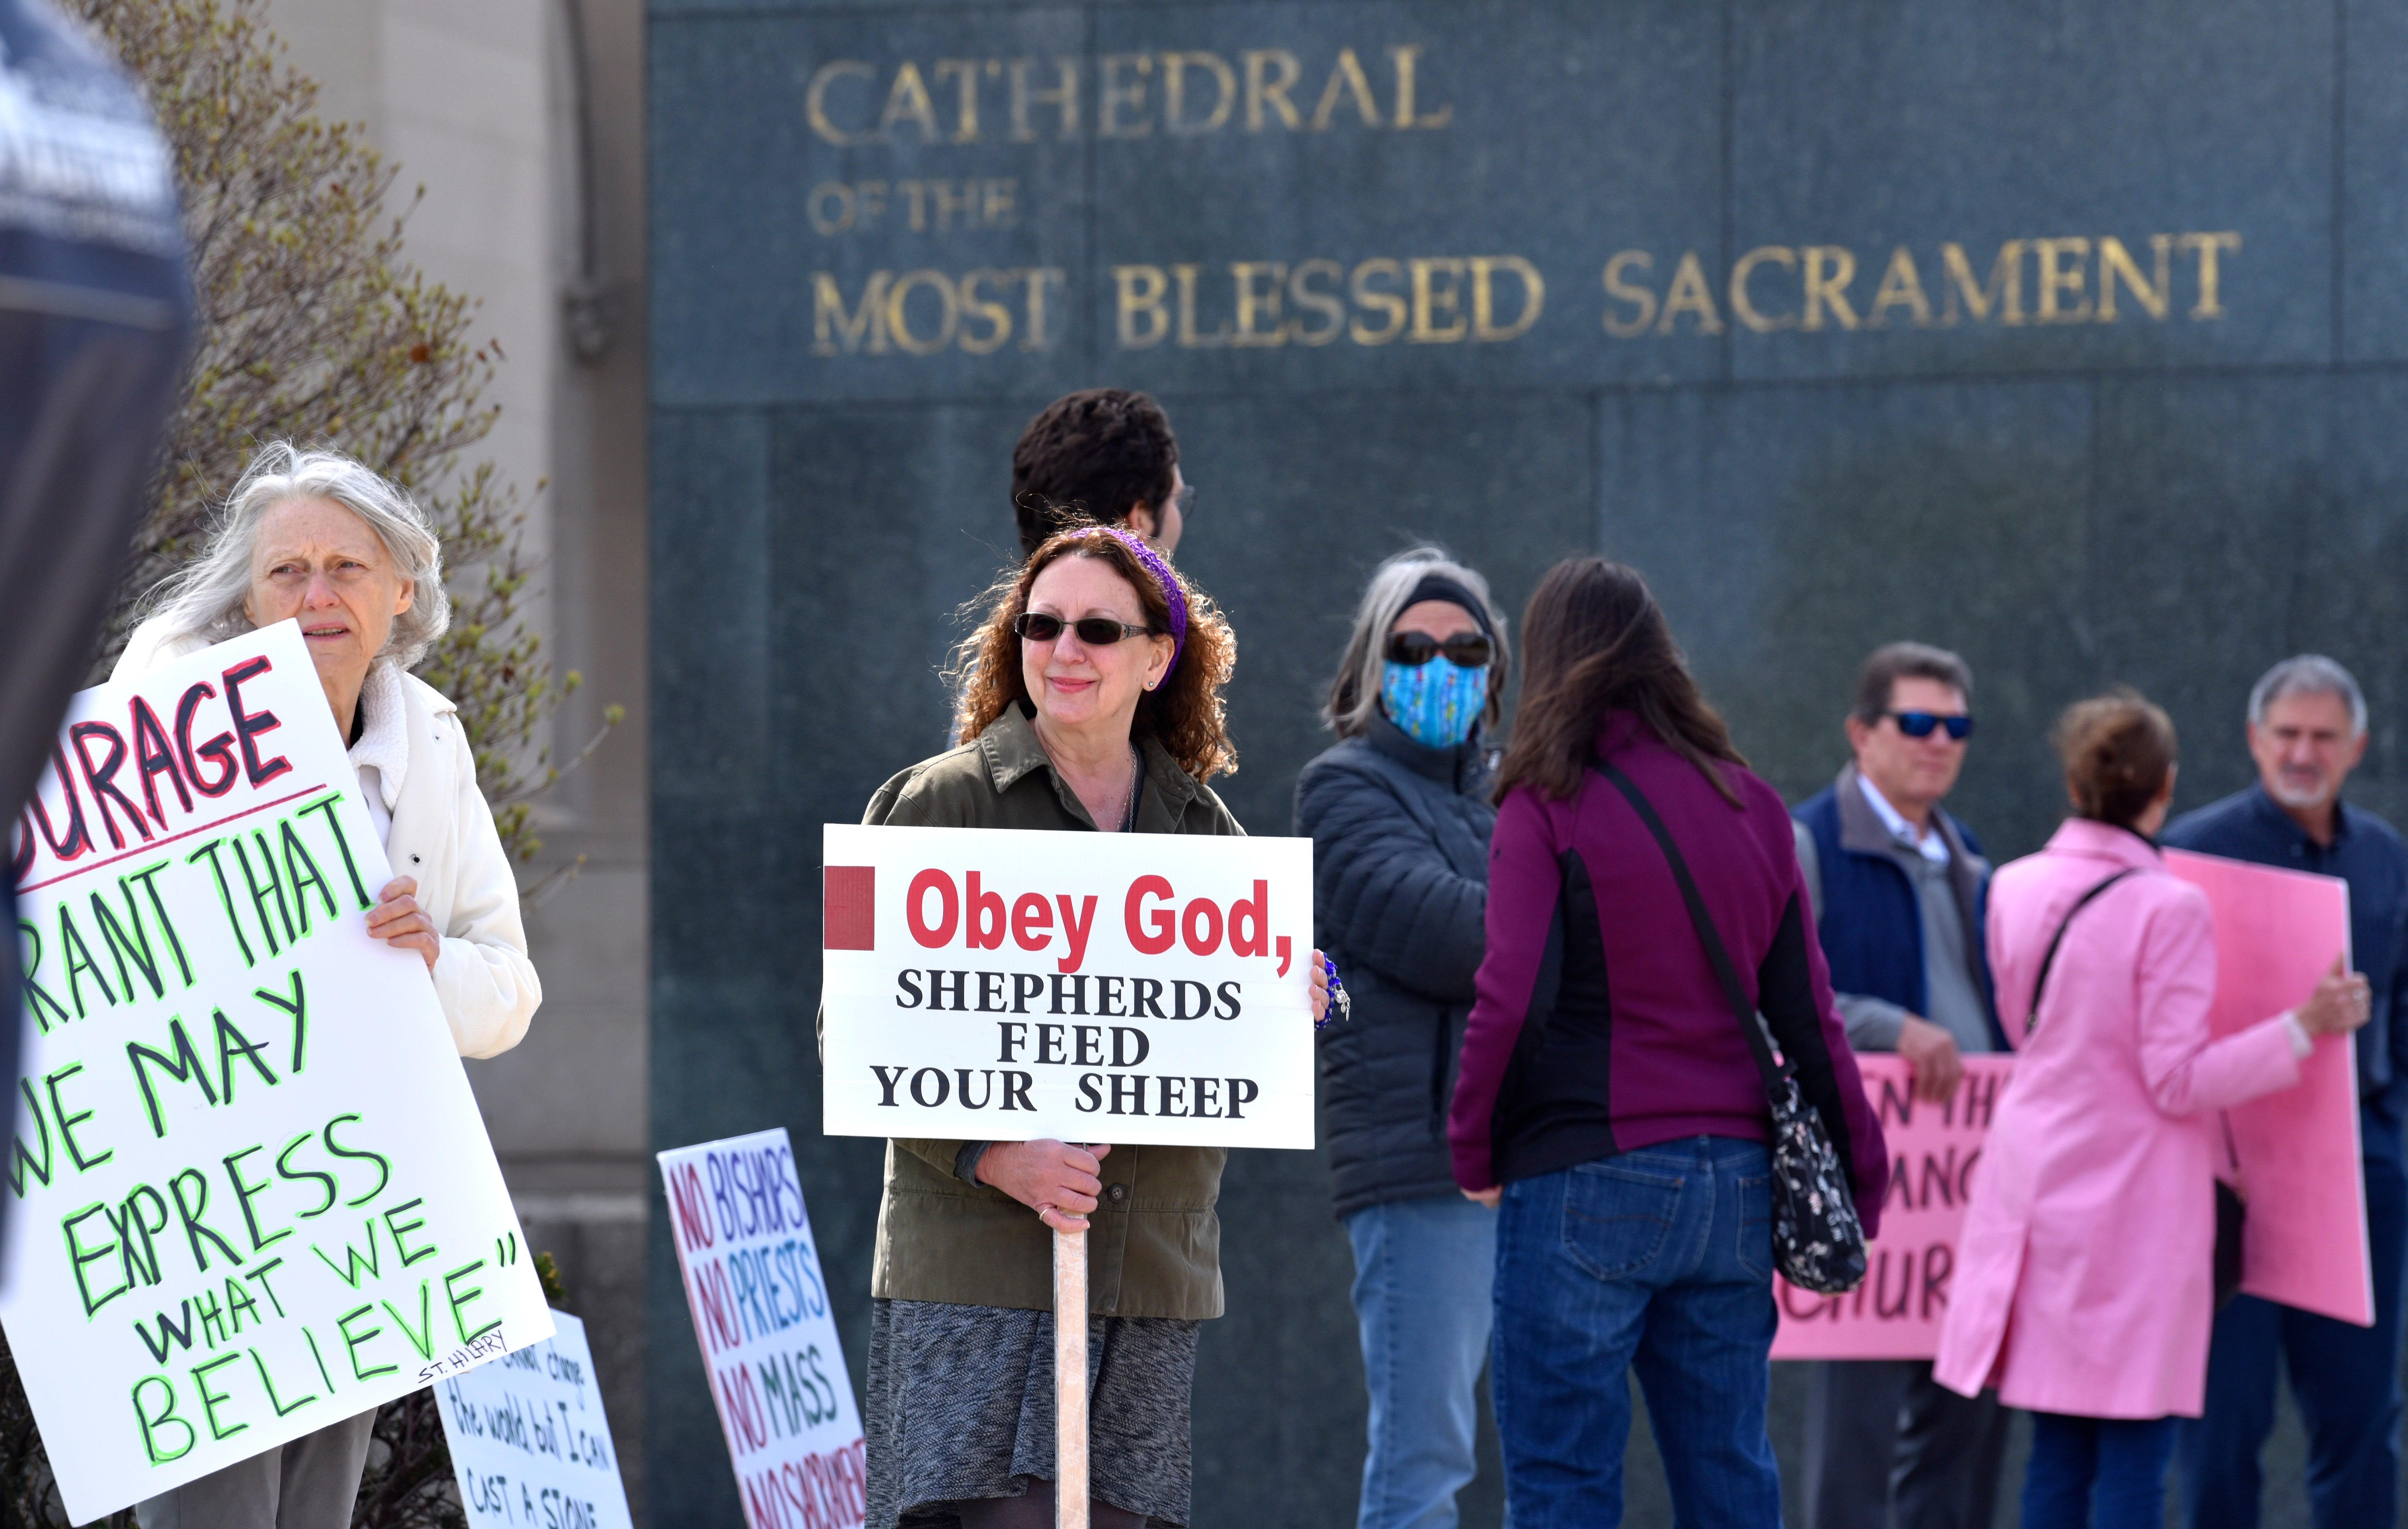 Carol Dumbrell, left, of Hazel Park, and Sally (who would not give her last name) hold signs in front of the cathedral.